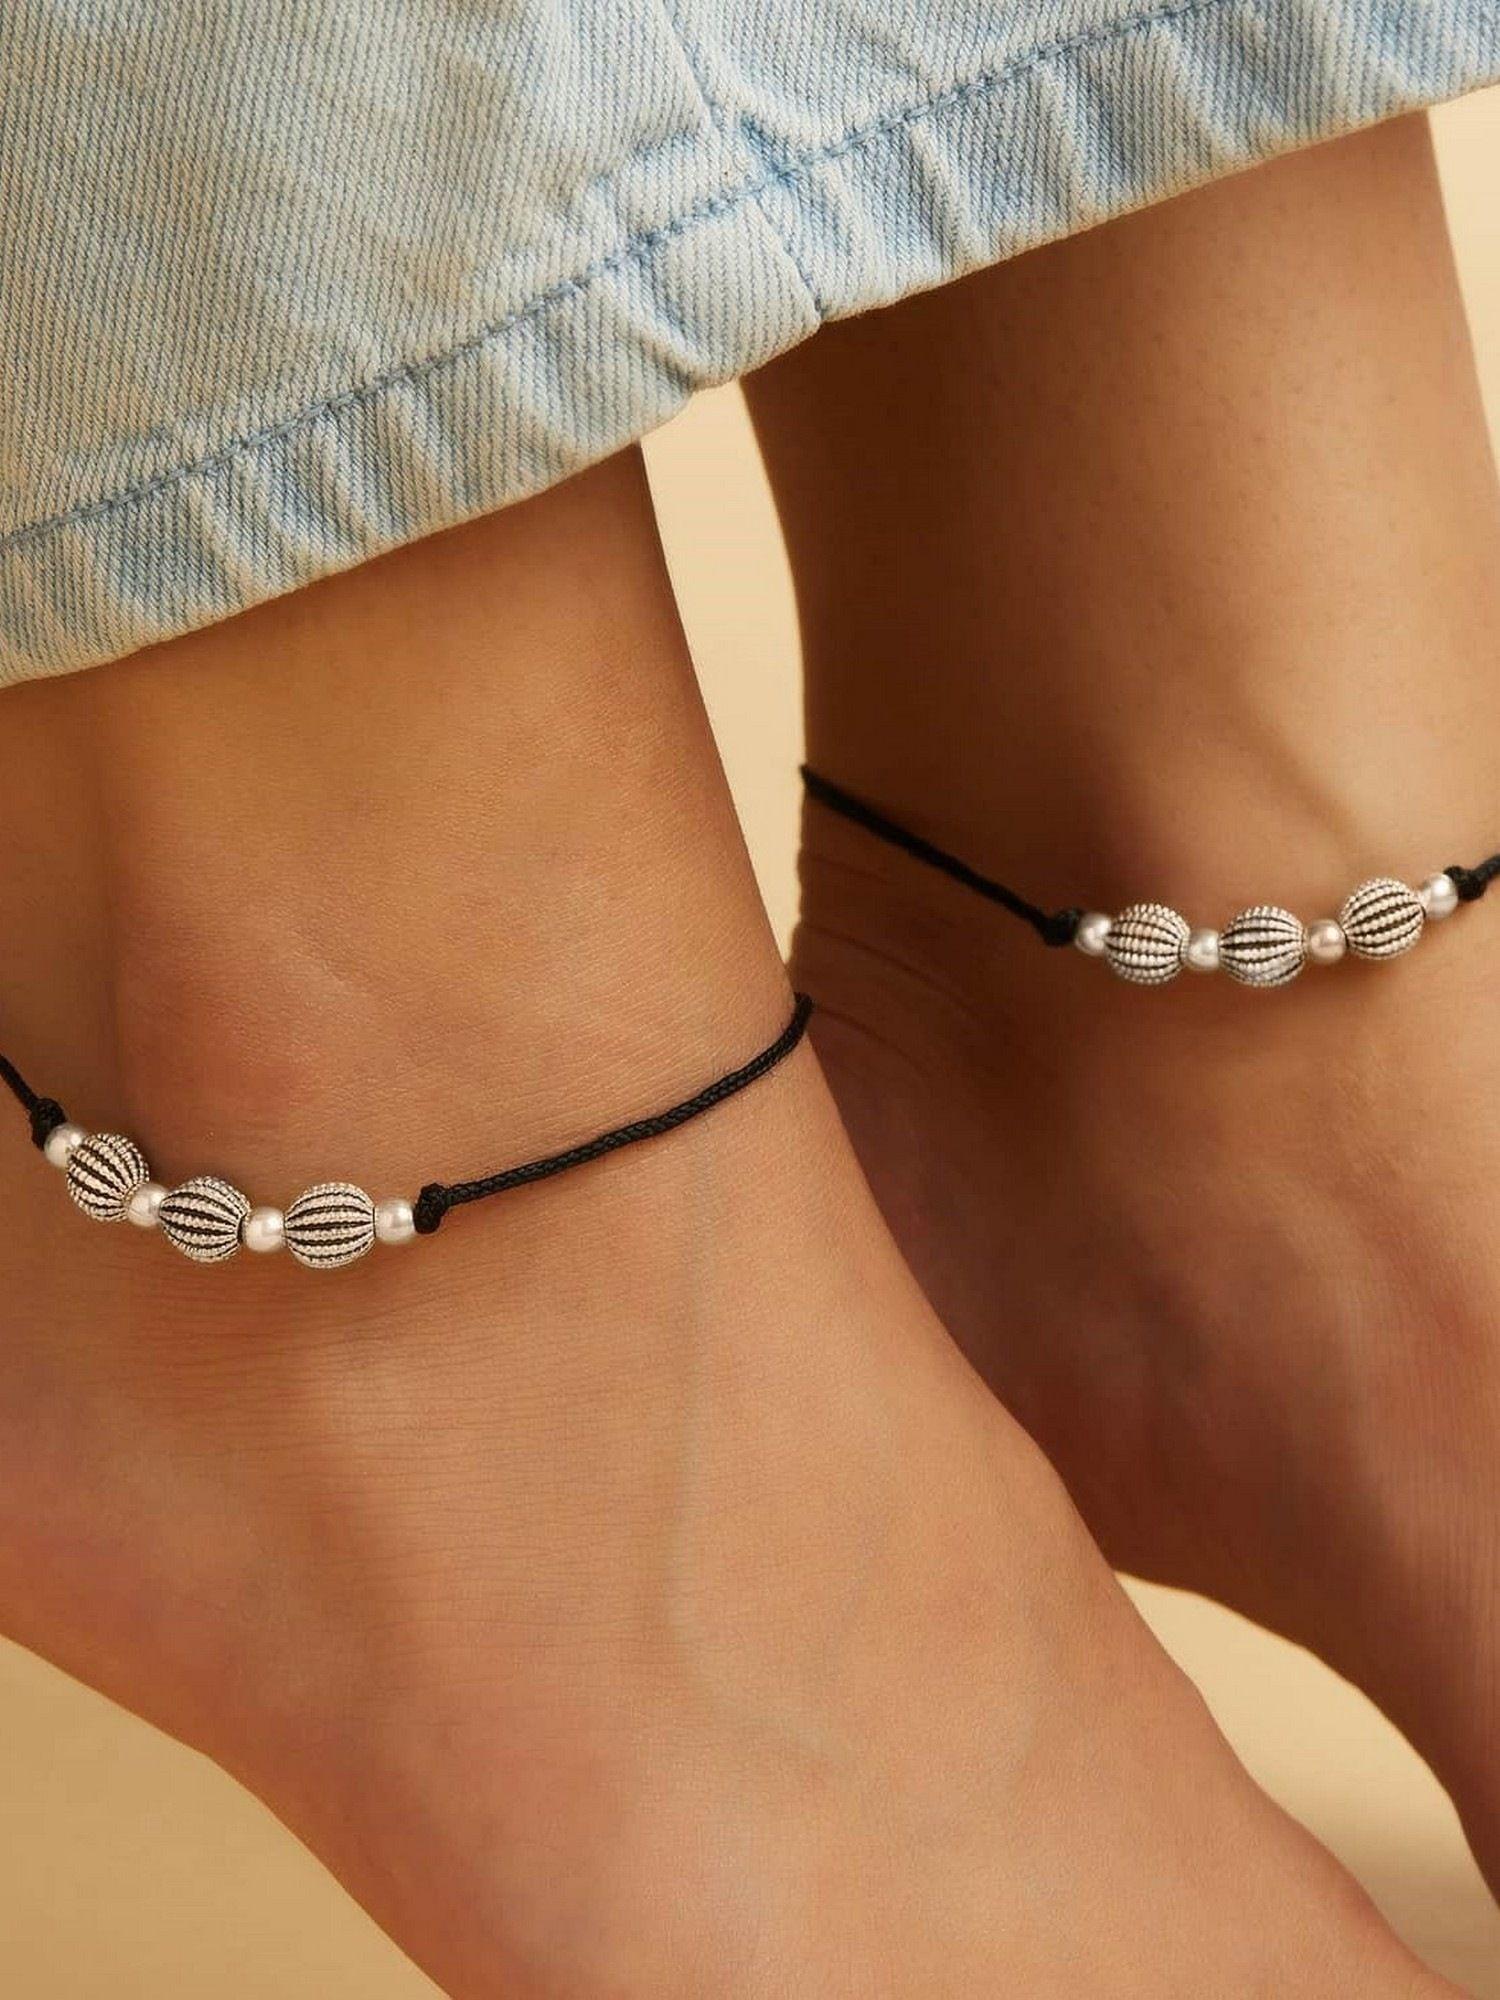 black thread beads rhodium plated 925 sterling silver anklets